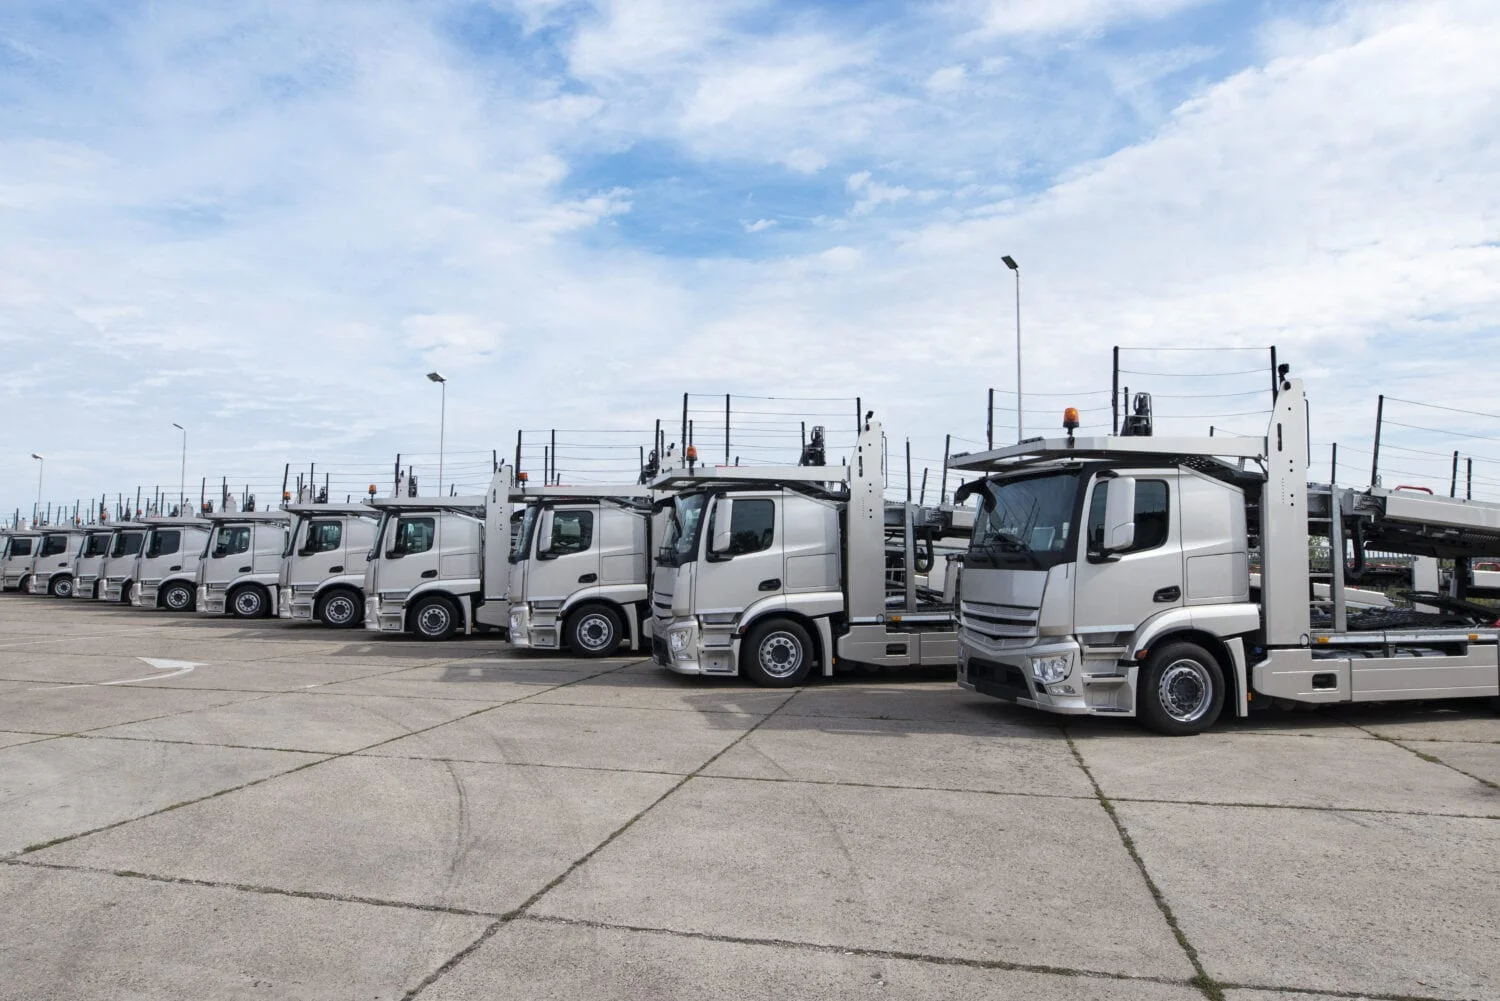 group-of-trucks-parked-in-line-at-truck-stop